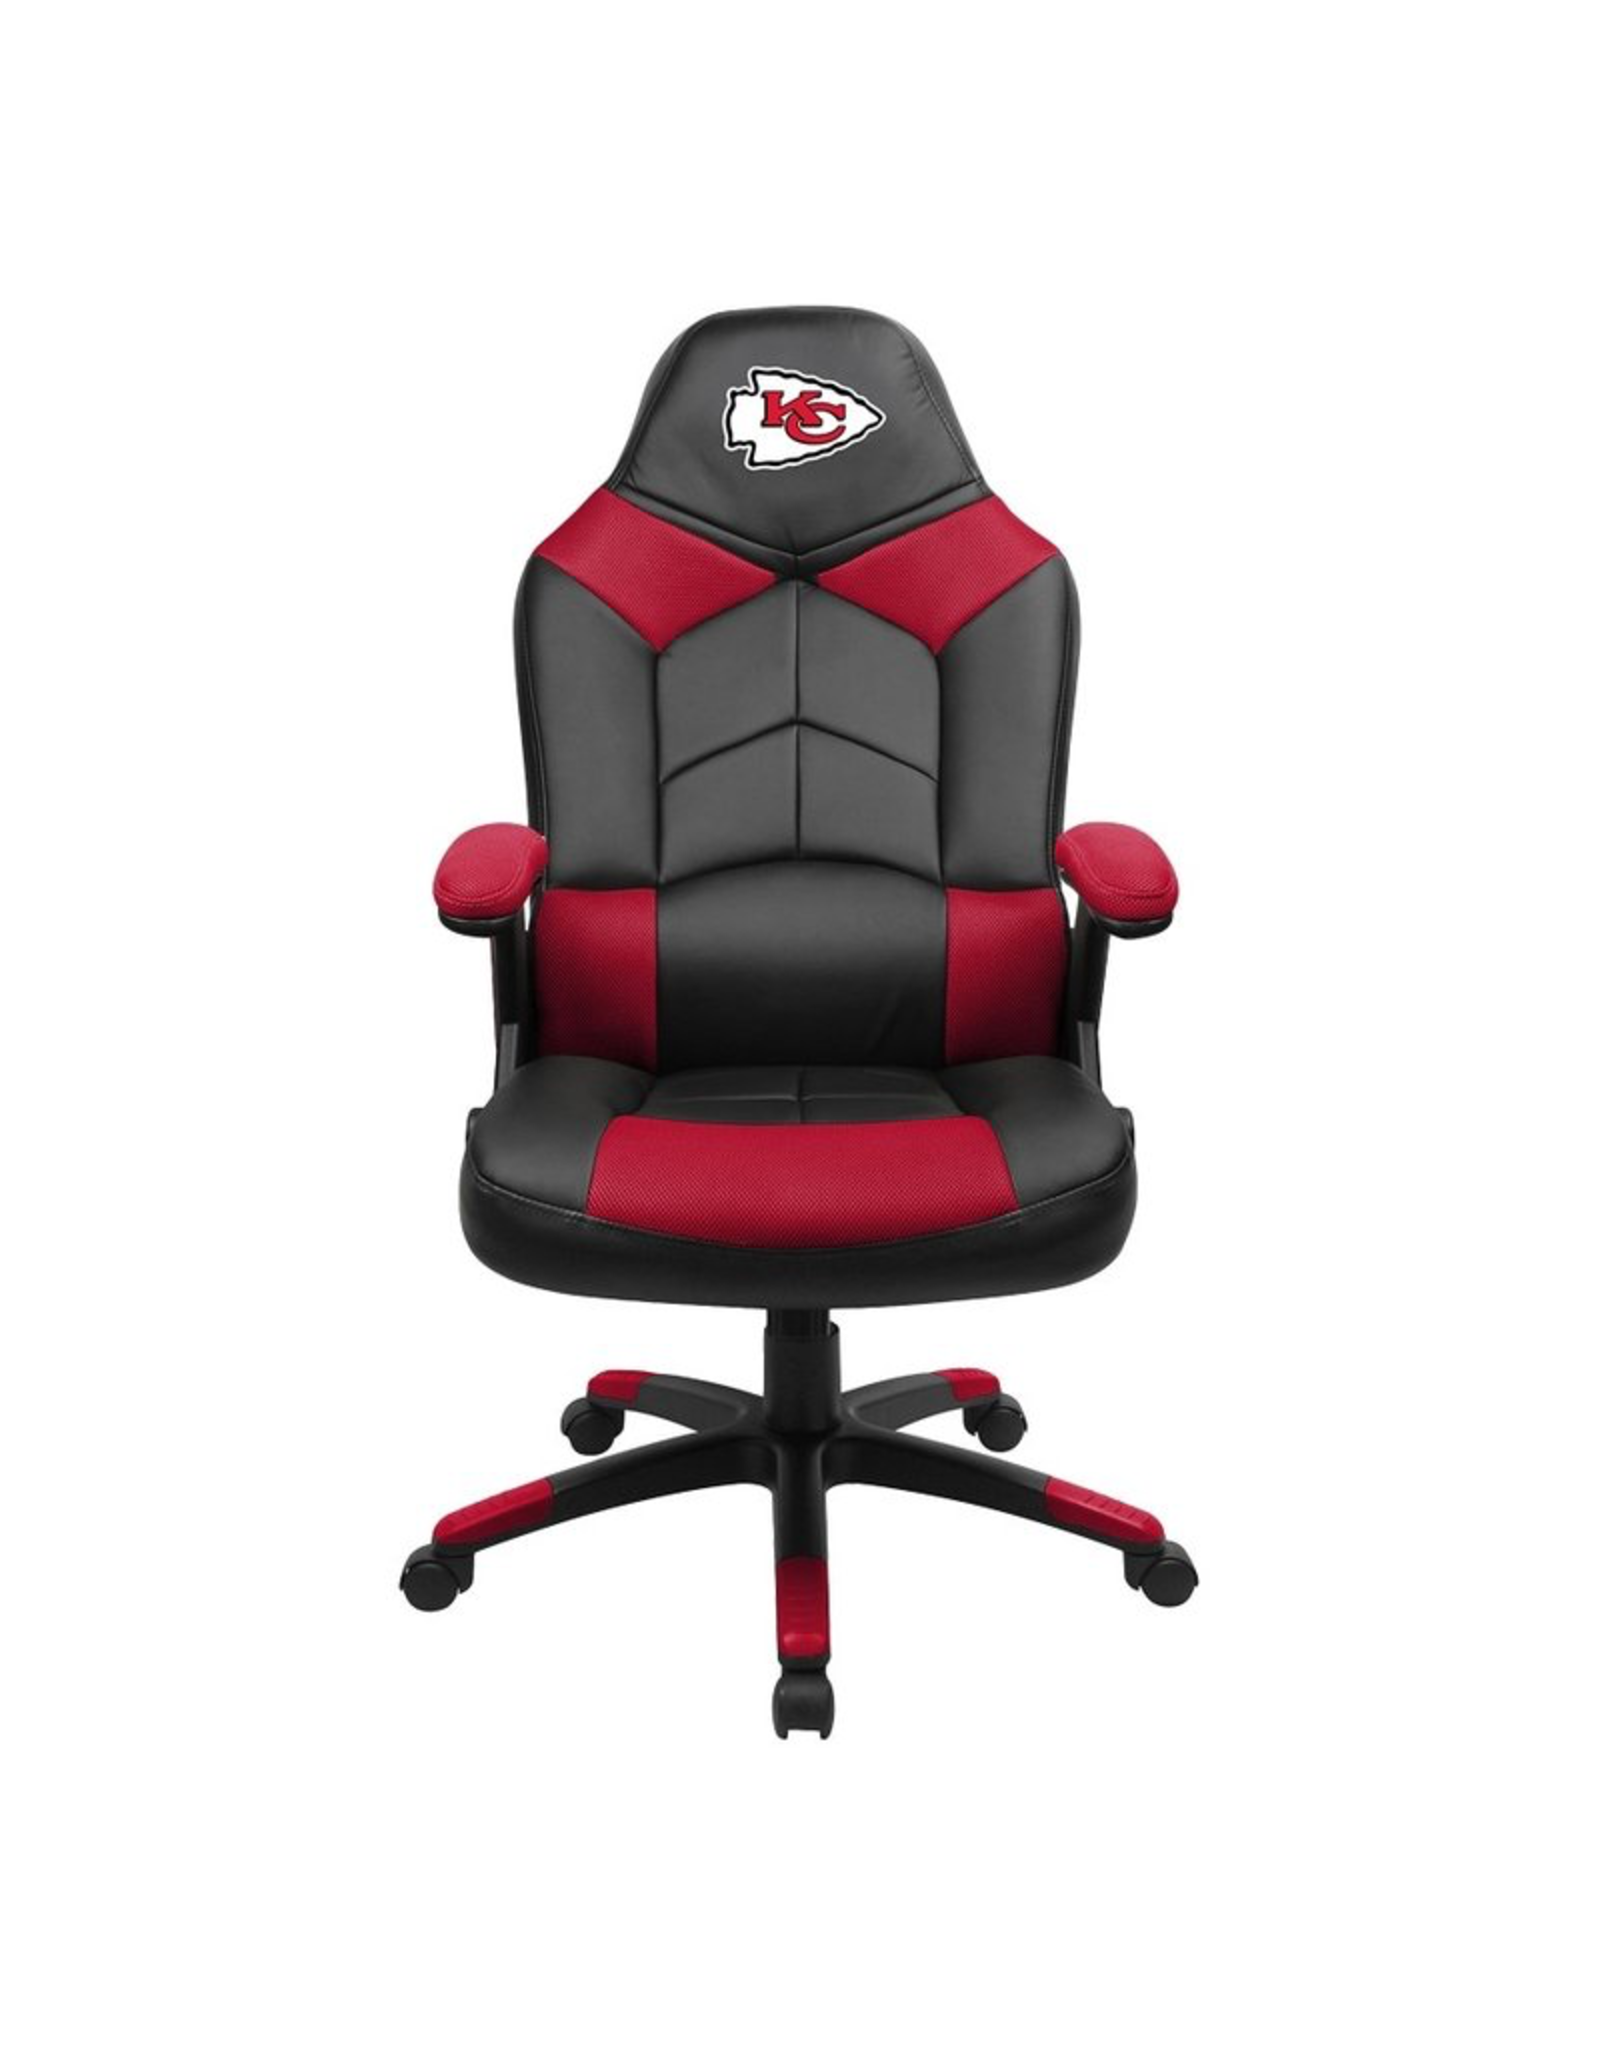 Imperial Kansas City Chiefs Gaming / Office Chair